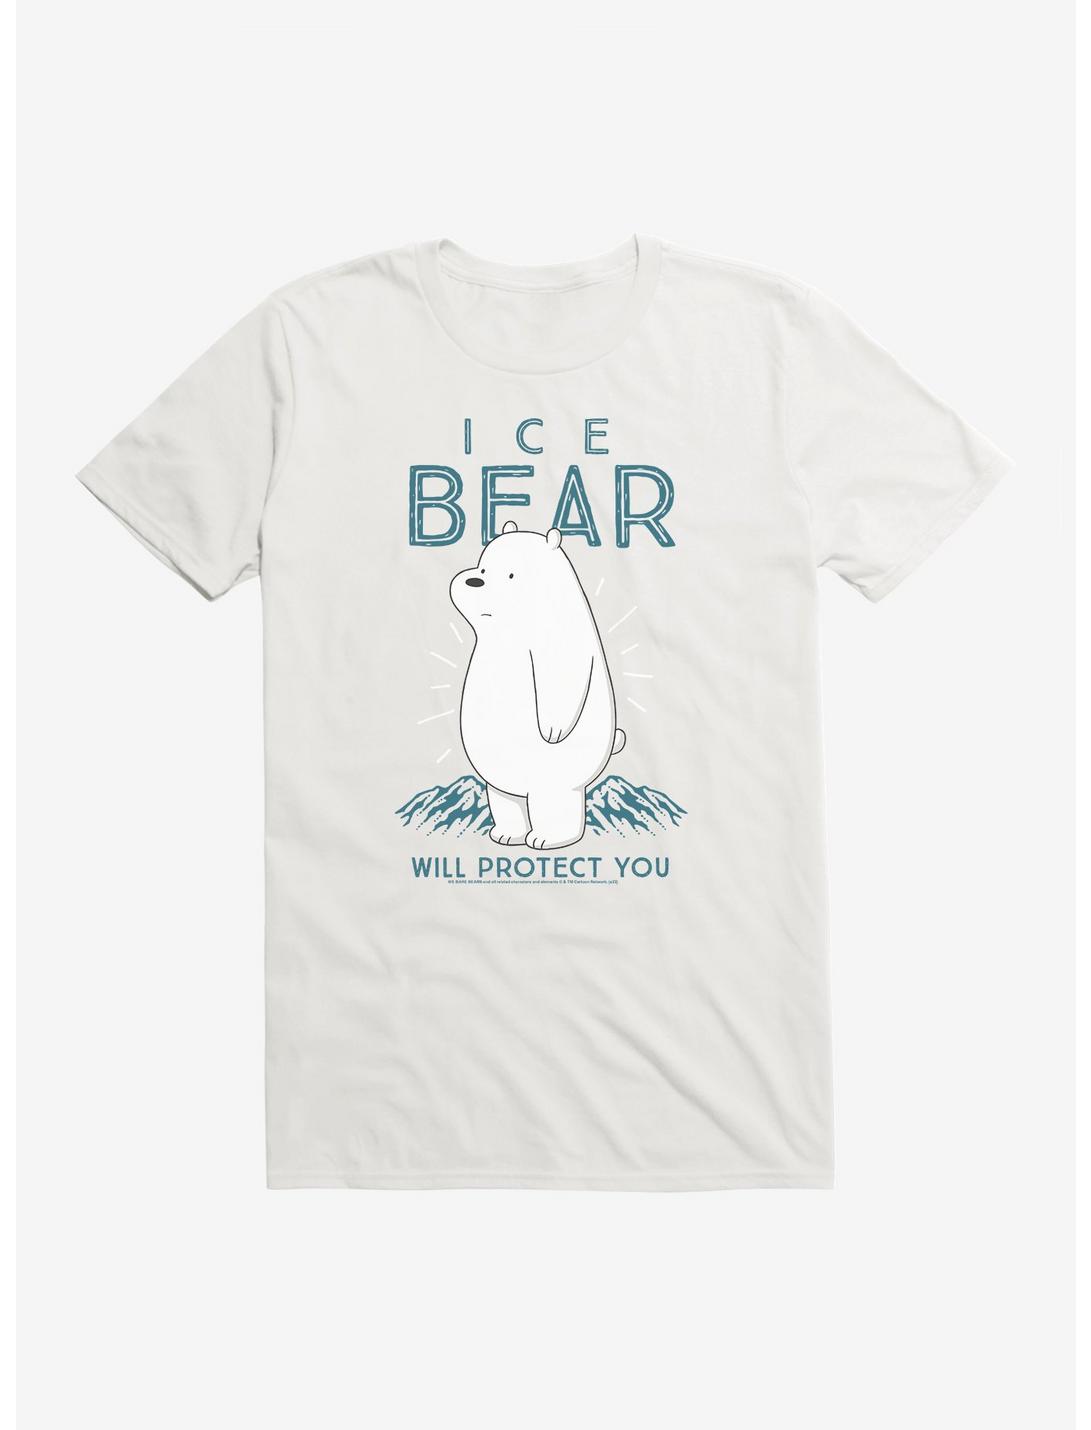 We Bare Bears Ice Bear Will Protect You T-Shirt, , hi-res